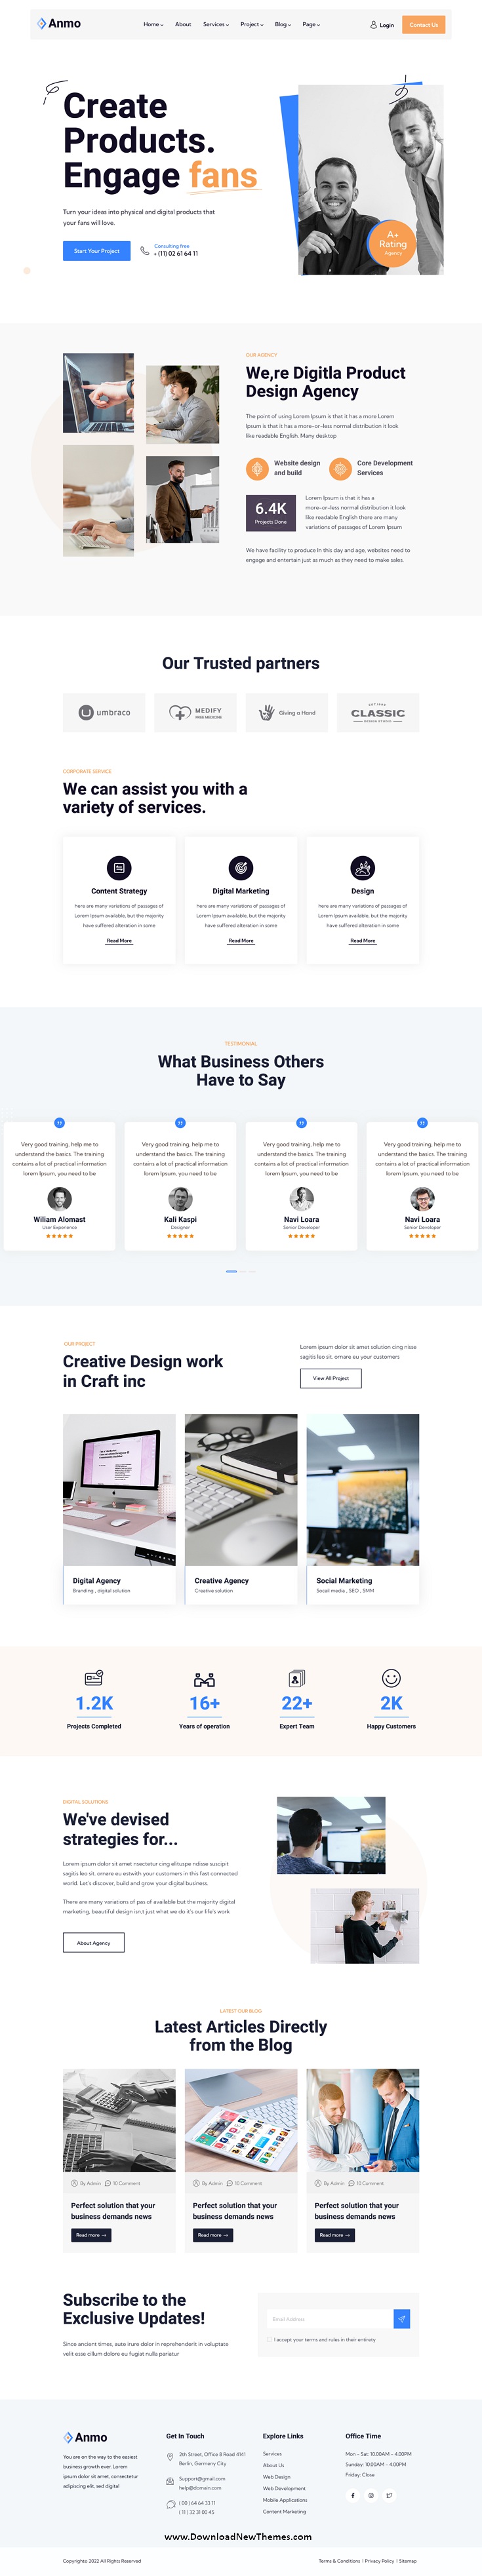 Anmo - Creative Digital Agency HTML Template Review